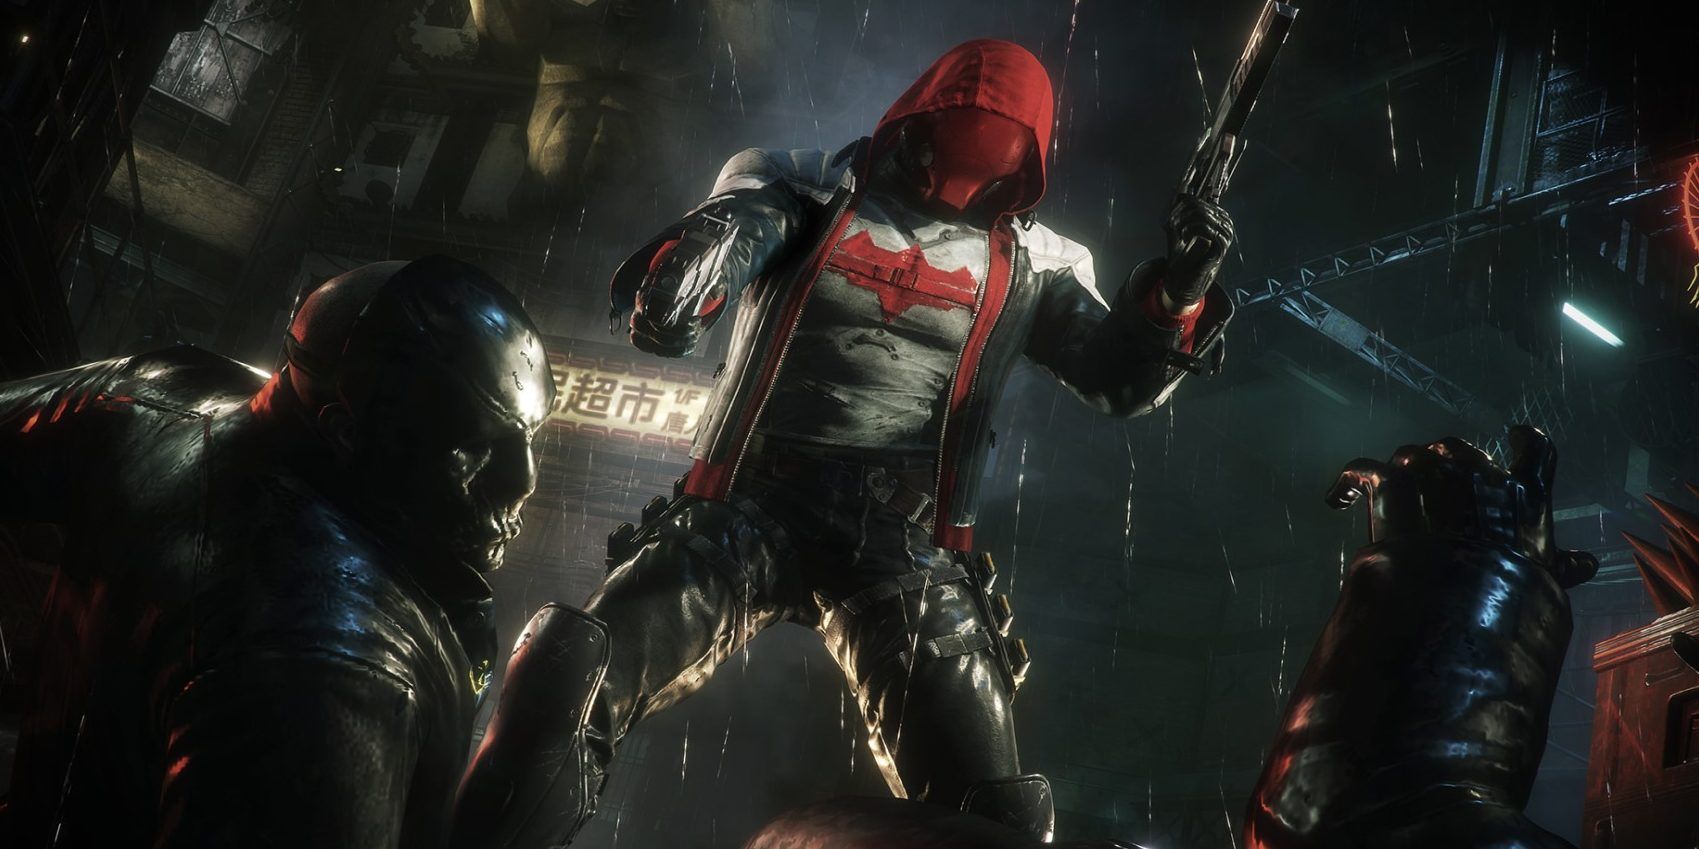 Promotional art of the Red Hood from Injustice 2